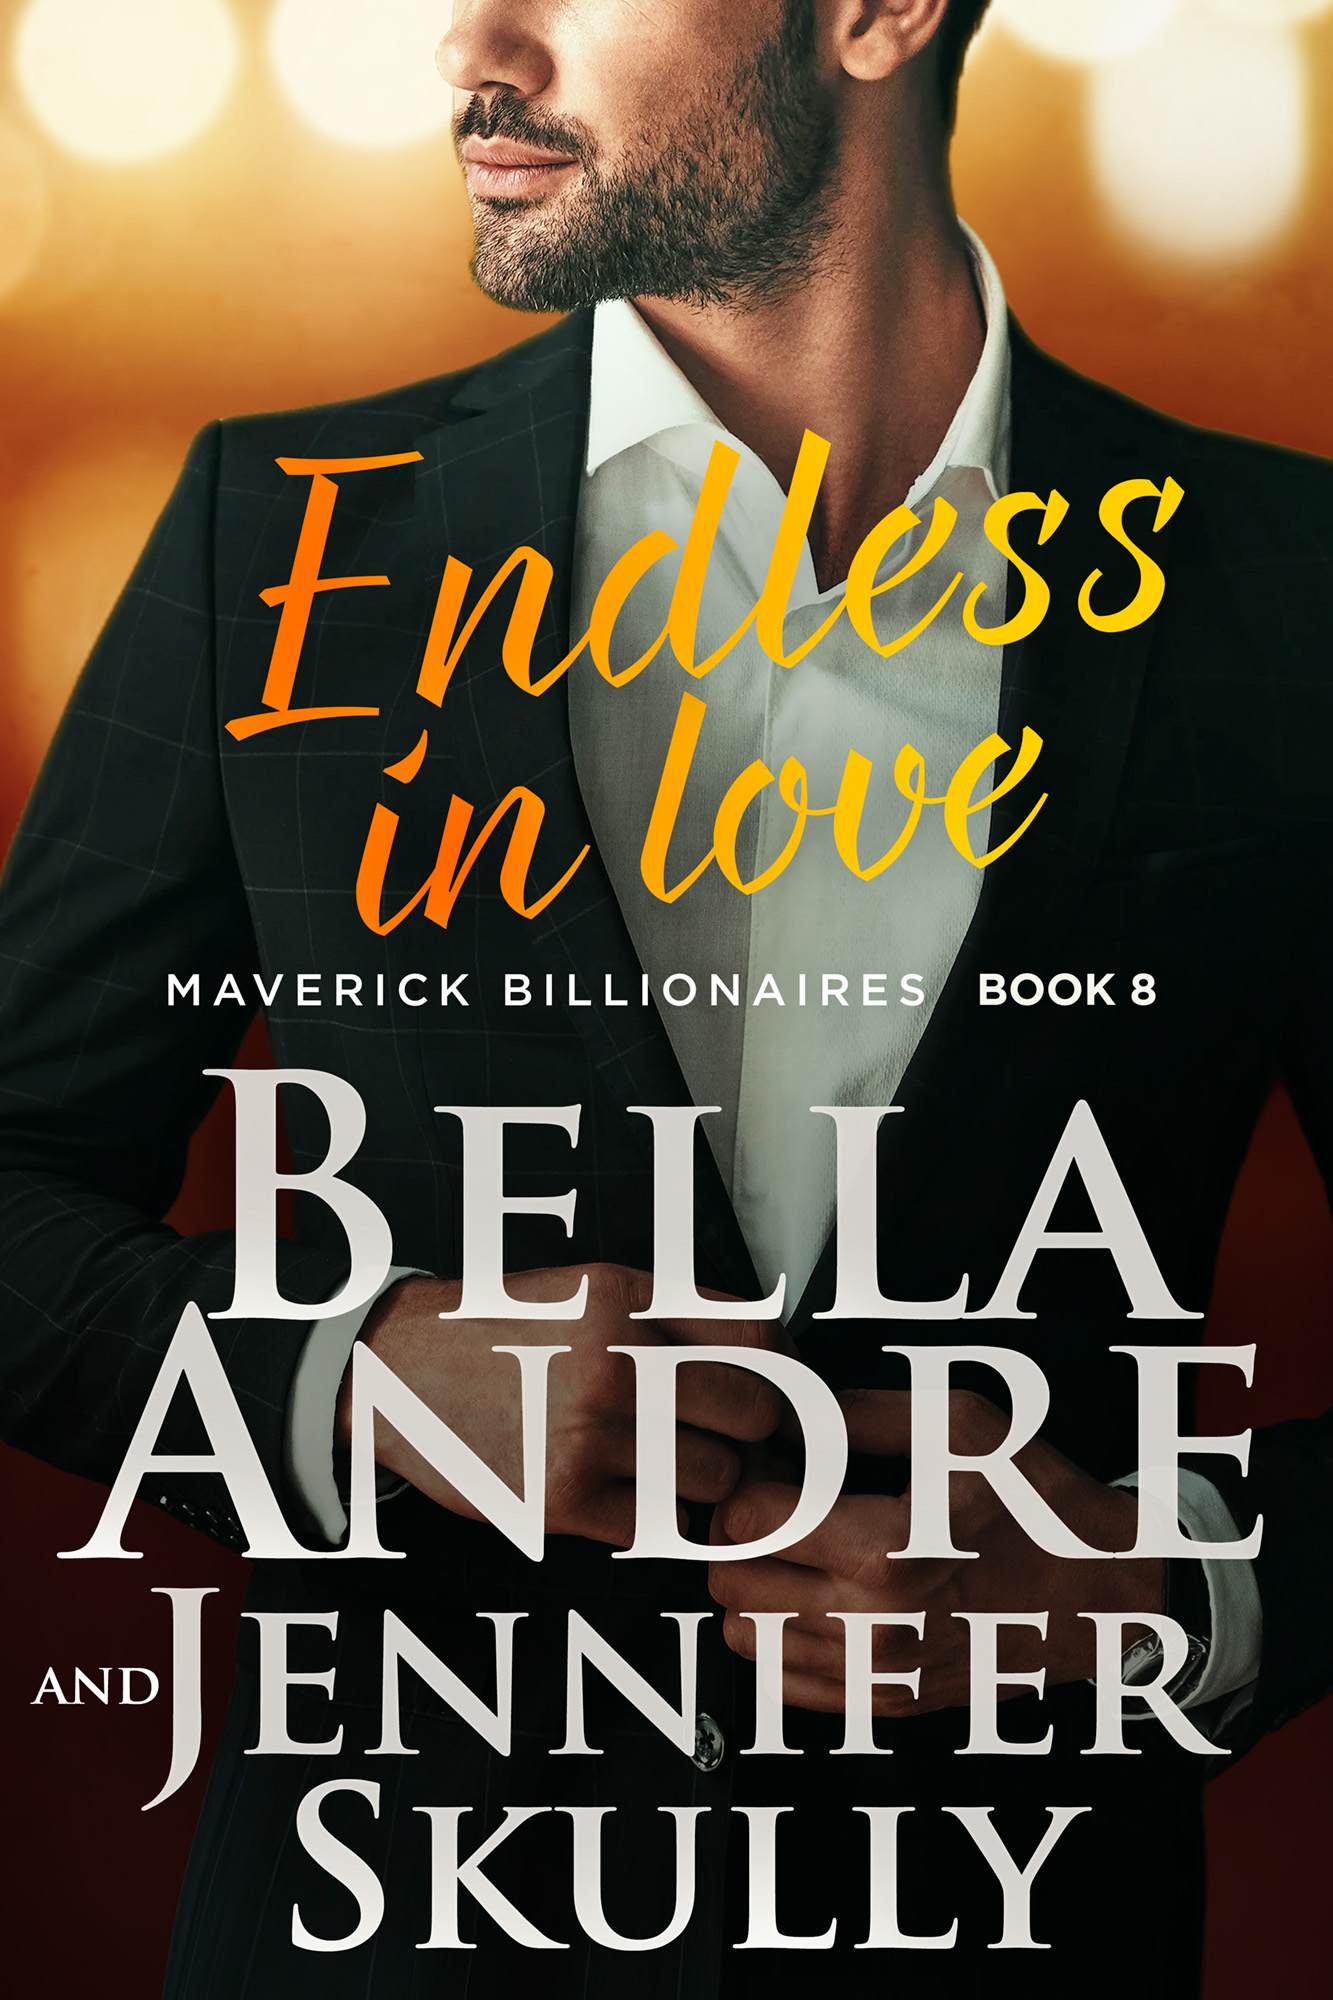 Cover of Endless in Love - Maverick Billionaires Book 8 by Bella Andre and Jennifer Skully